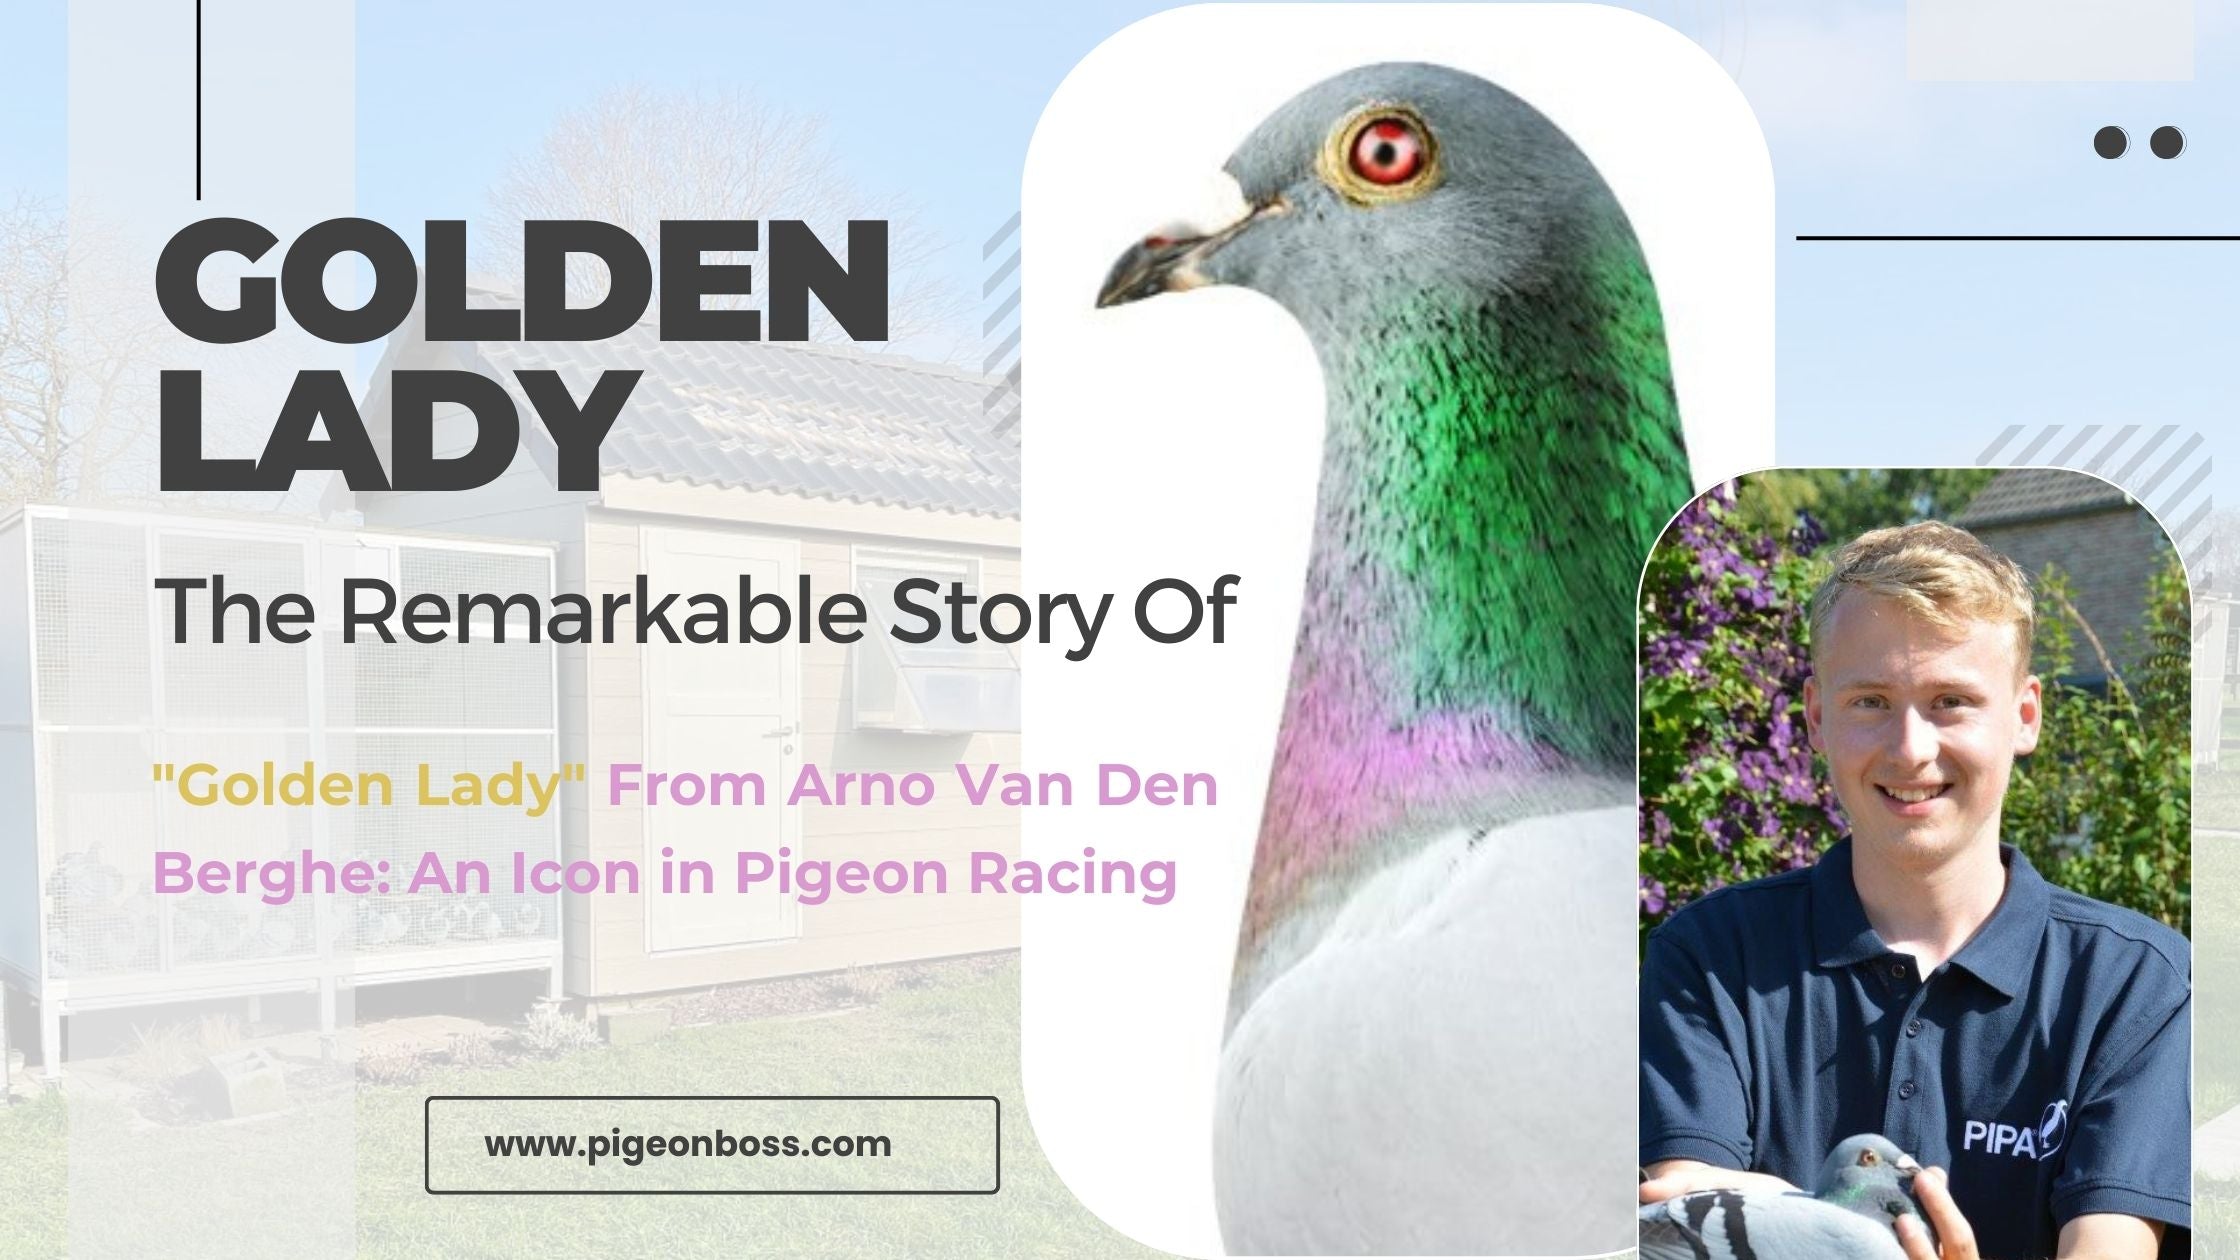 The Remarkable Story of "Golden Lady" From Arno Van Den Berghe: An Icon in Pigeon Racing